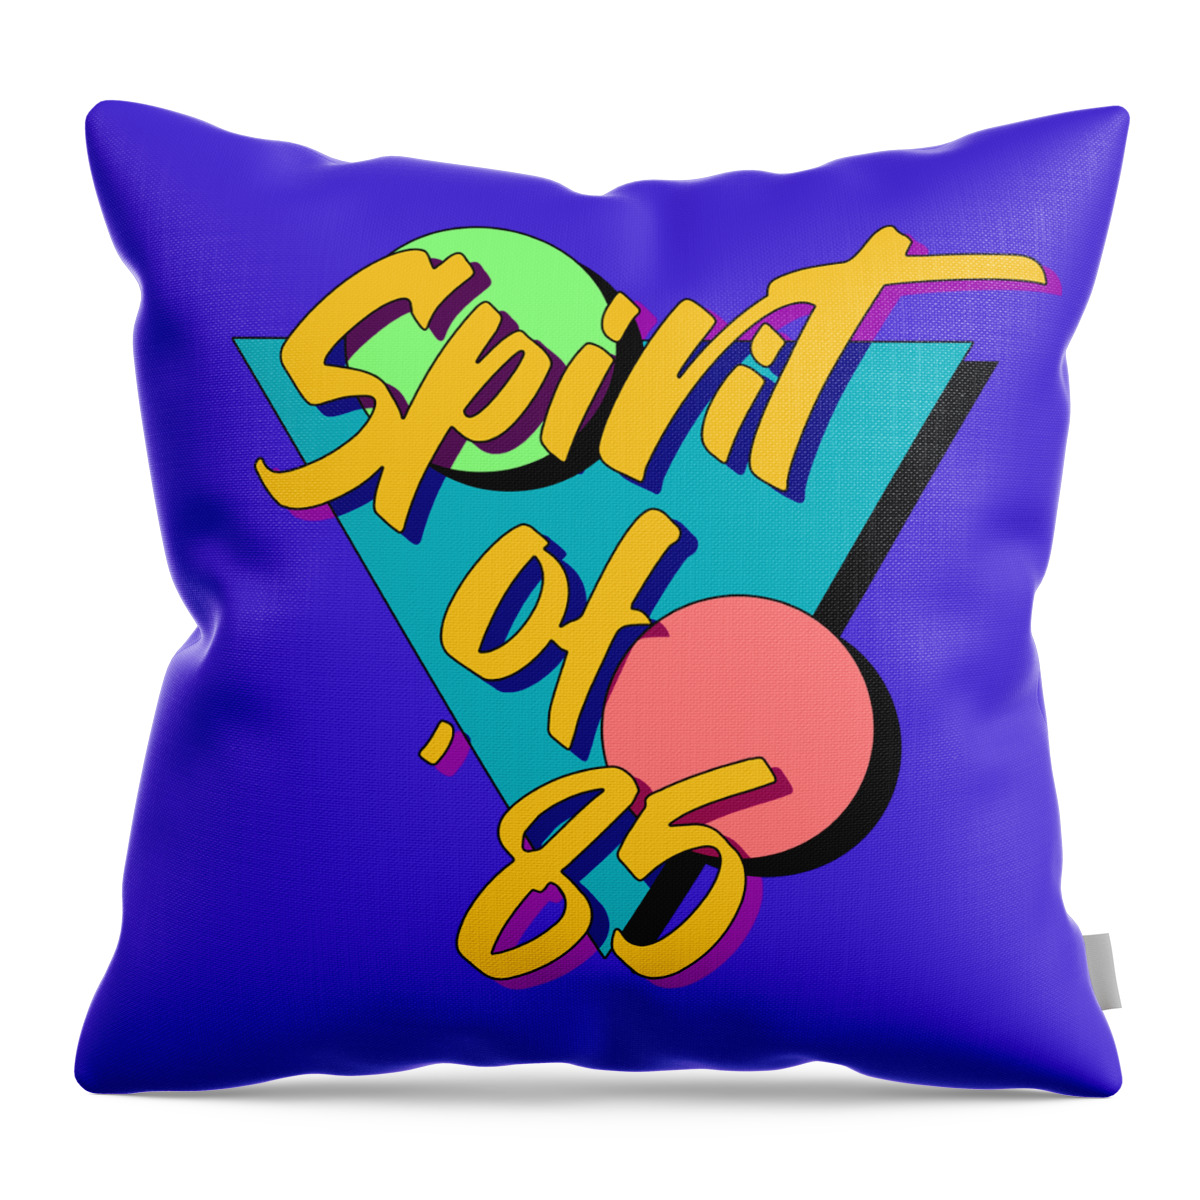 Memphis Throw Pillow featuring the digital art Spirit of 85 New Memphis Graphic by Christopher Lotito